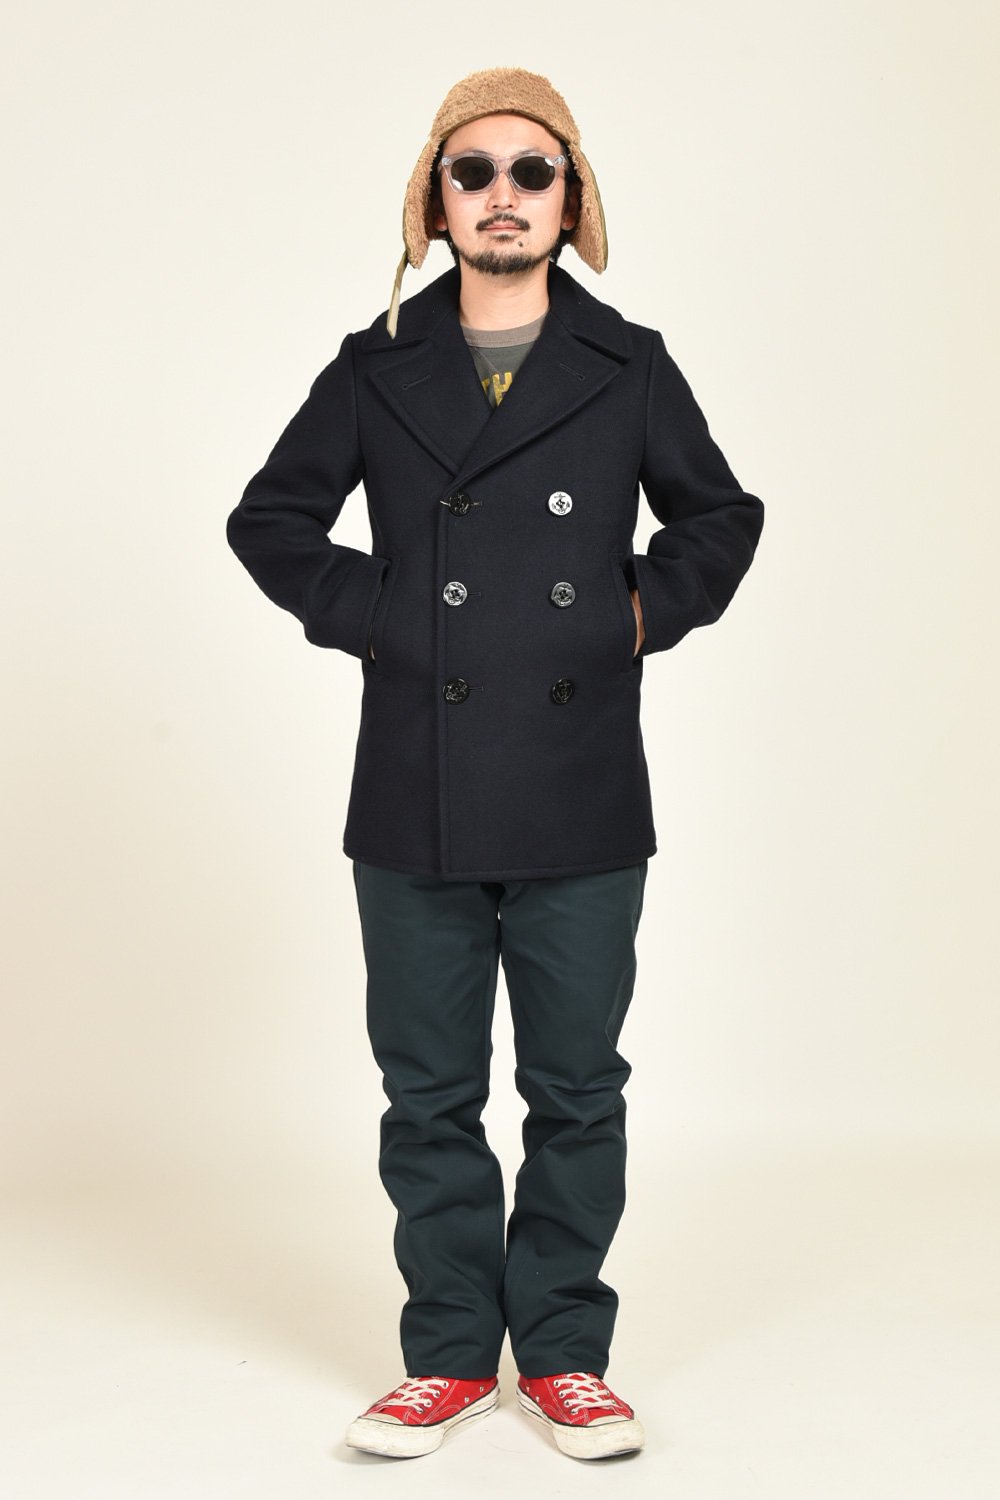 UNITED CARR by Buzz Rickson's(ユナイテッドカーbyバズリクソンズ) メルトンピーコート 26oz.WOOL MELTON  PEA COAT UC14231 通販正規取扱 | ハーレムストア